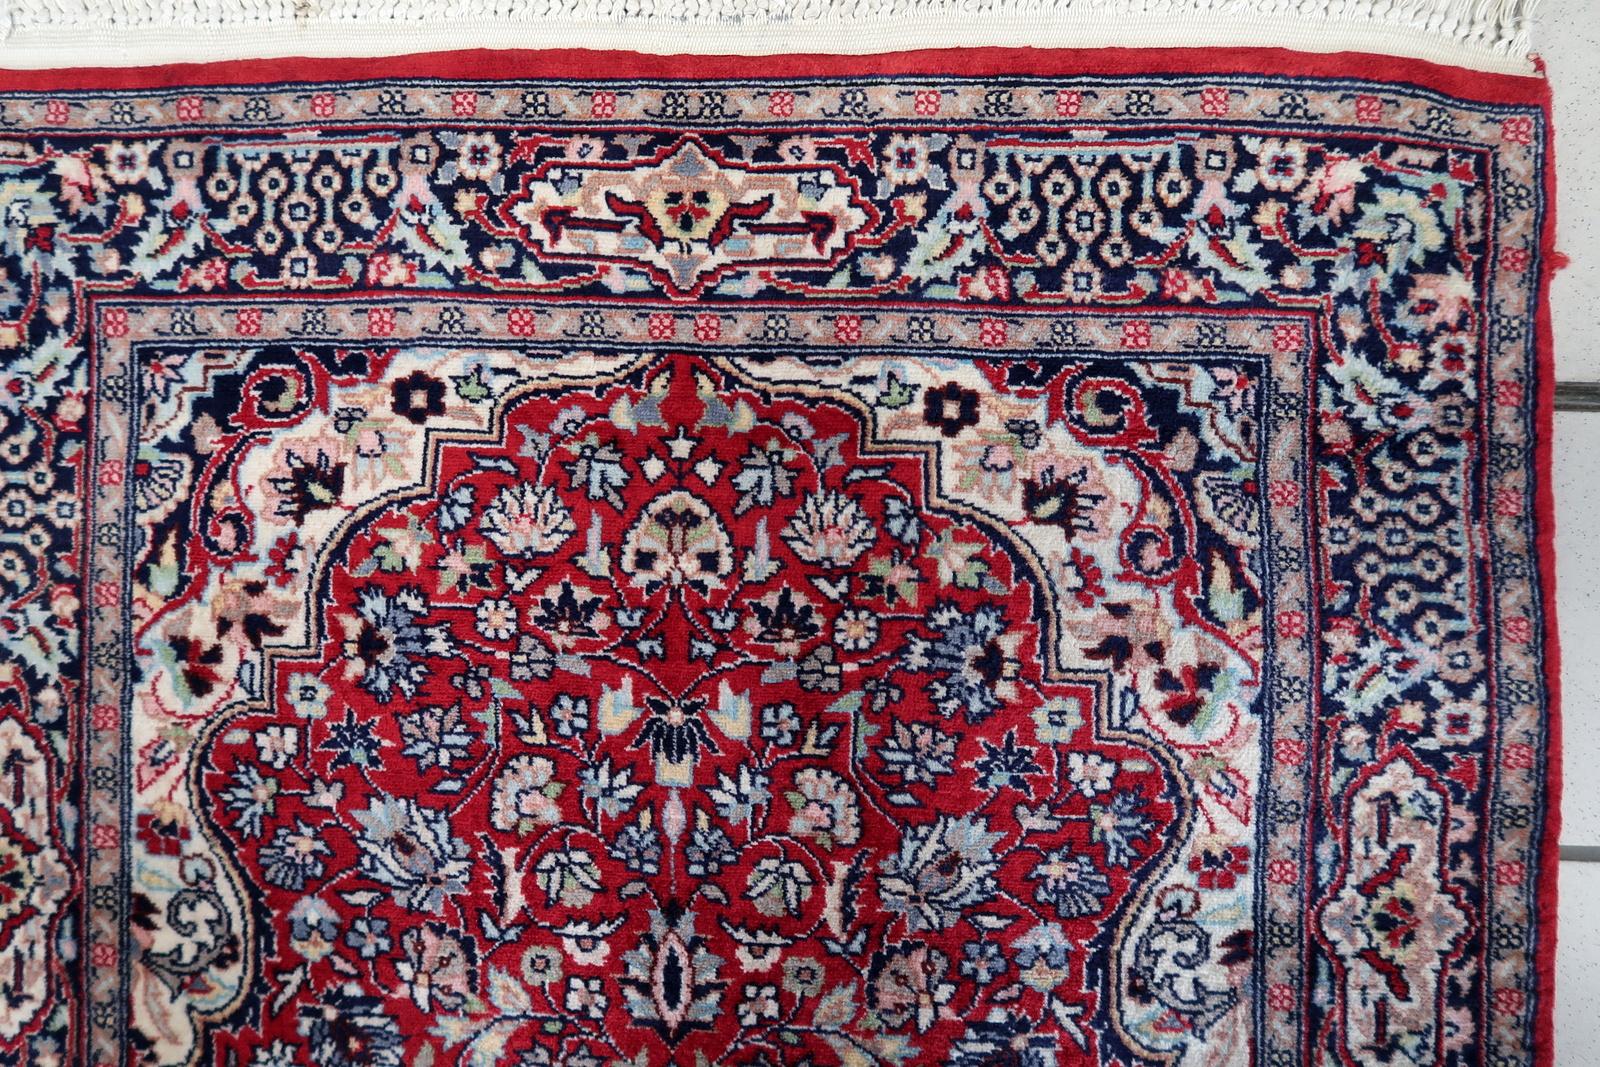 Presenting our exquisite Handmade Vintage Persian Style Kashan Runner Rug, a testament to the enduring beauty of traditional Persian craftsmanship from the 1960s. In its original good condition, this rug exudes authenticity and charm.

Measuring at